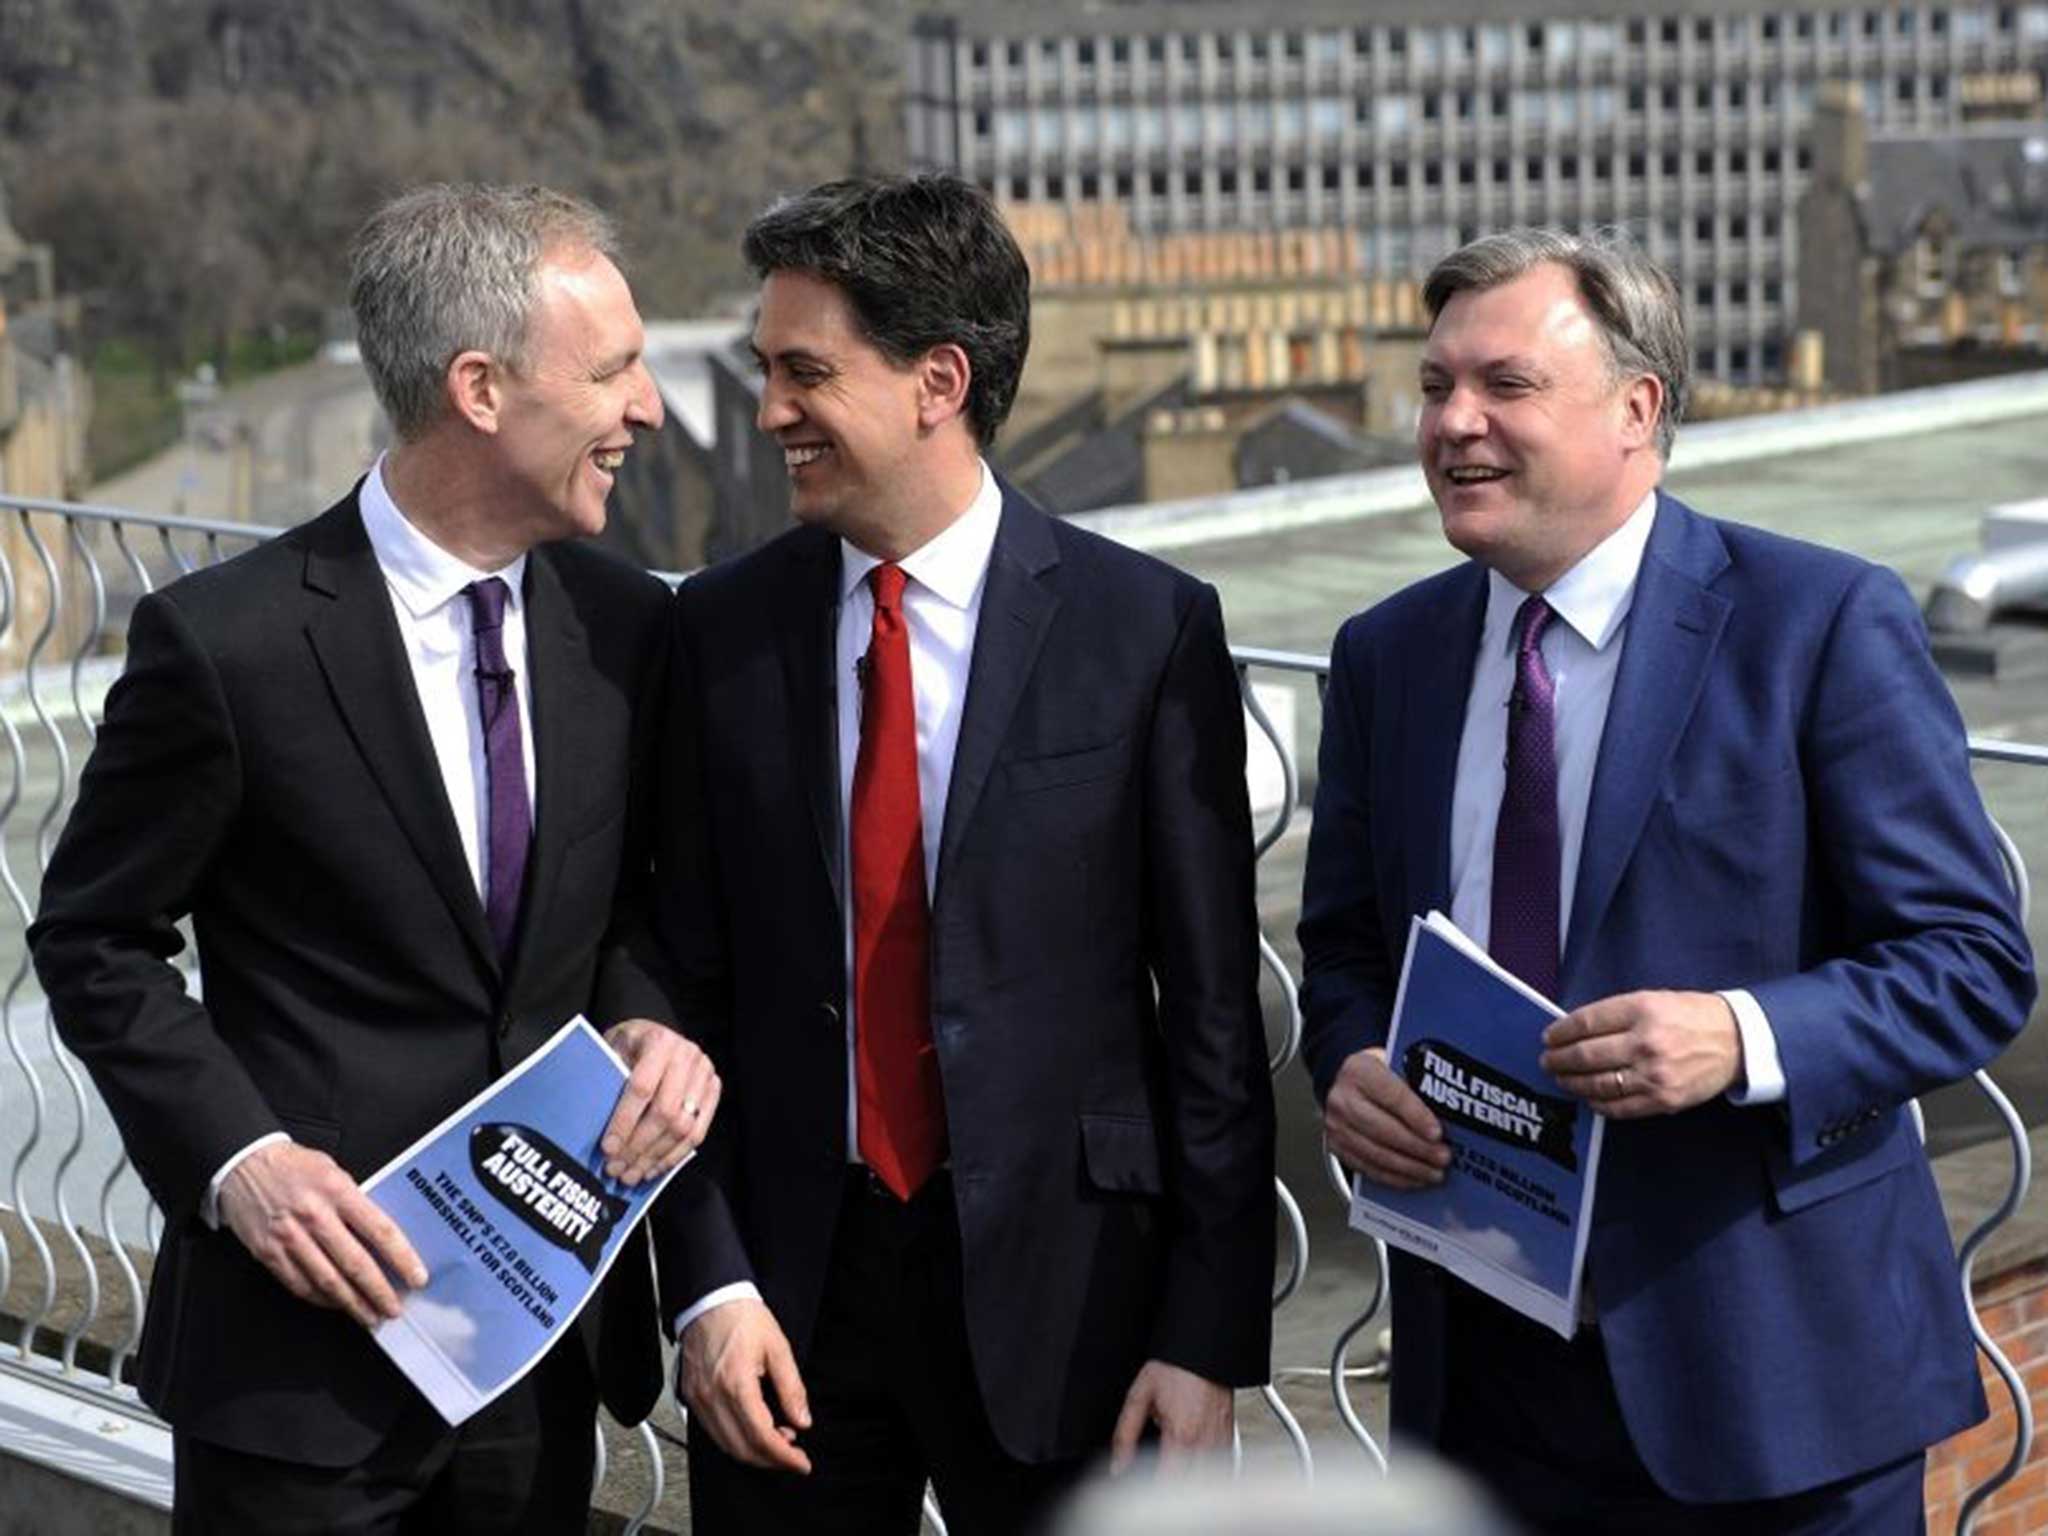 Ed Miliband, centre, and Ed Balls, right, both moved to disown Jim Murphy's claims